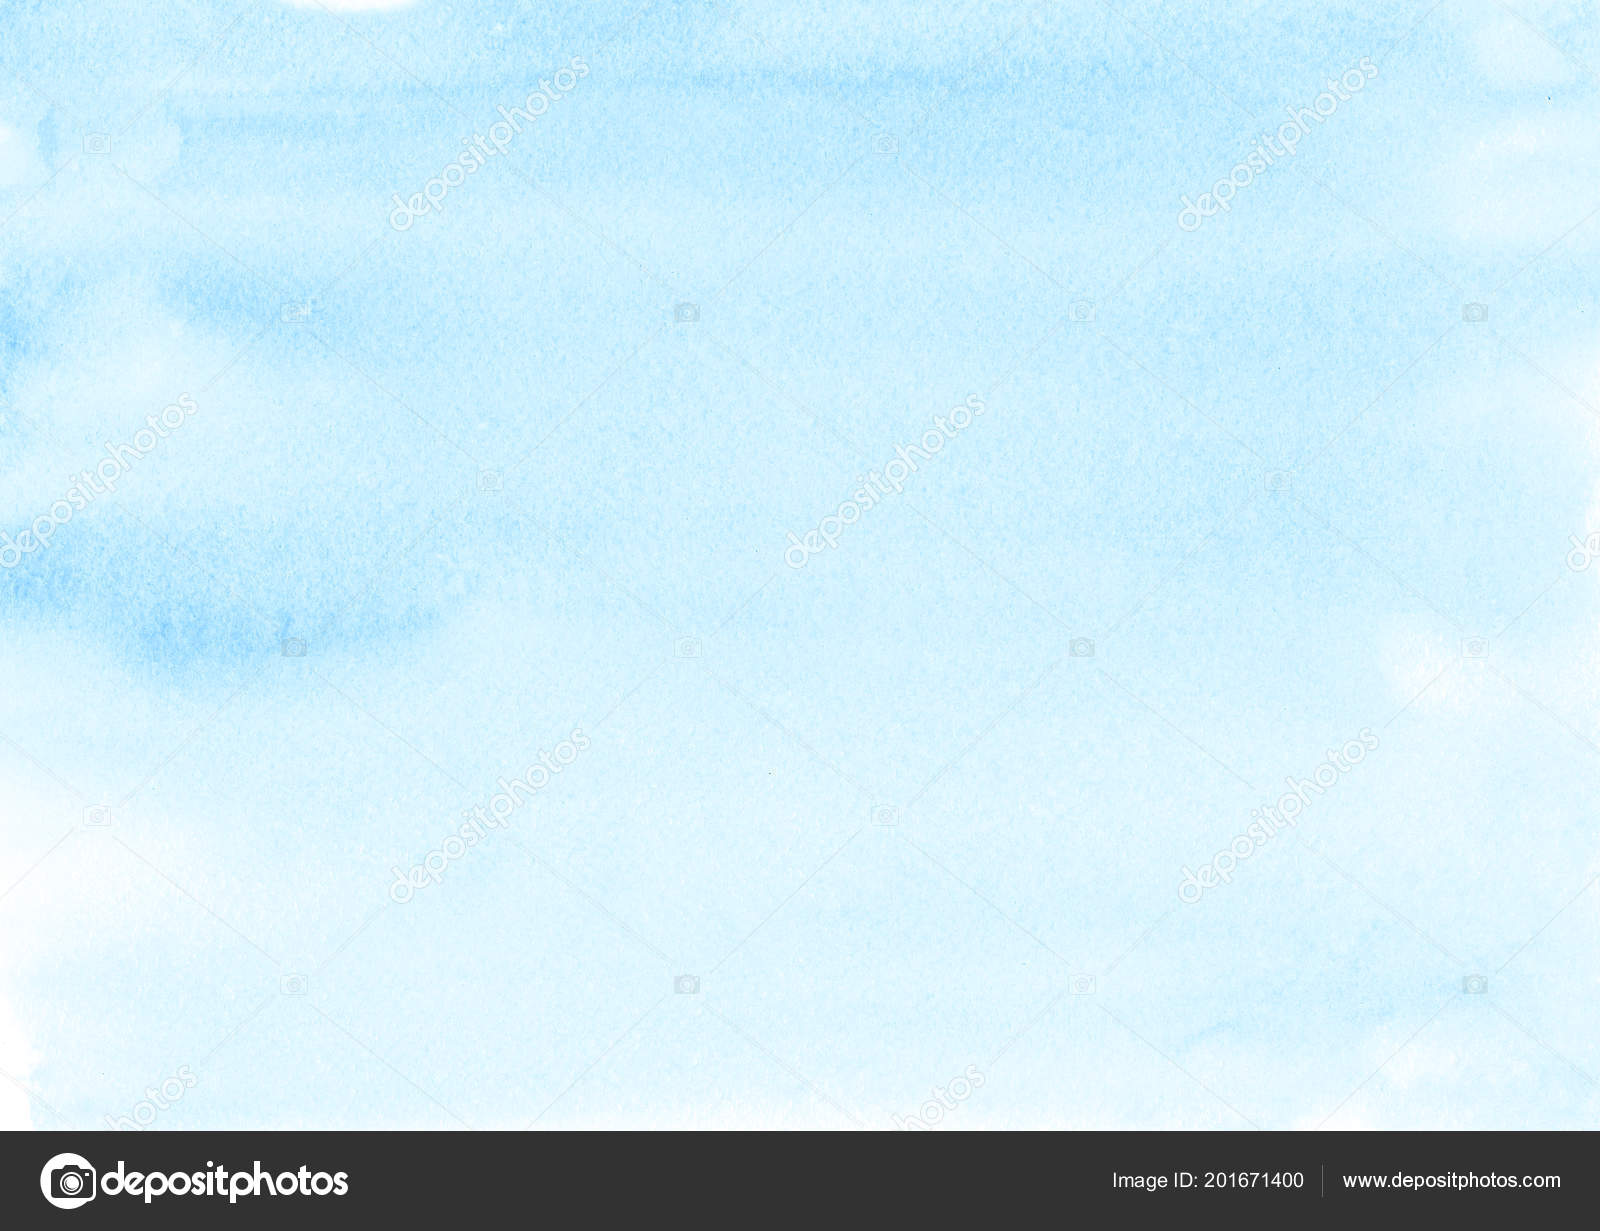 Light blue paper texture background 4427722 Stock Photo at Vecteezy